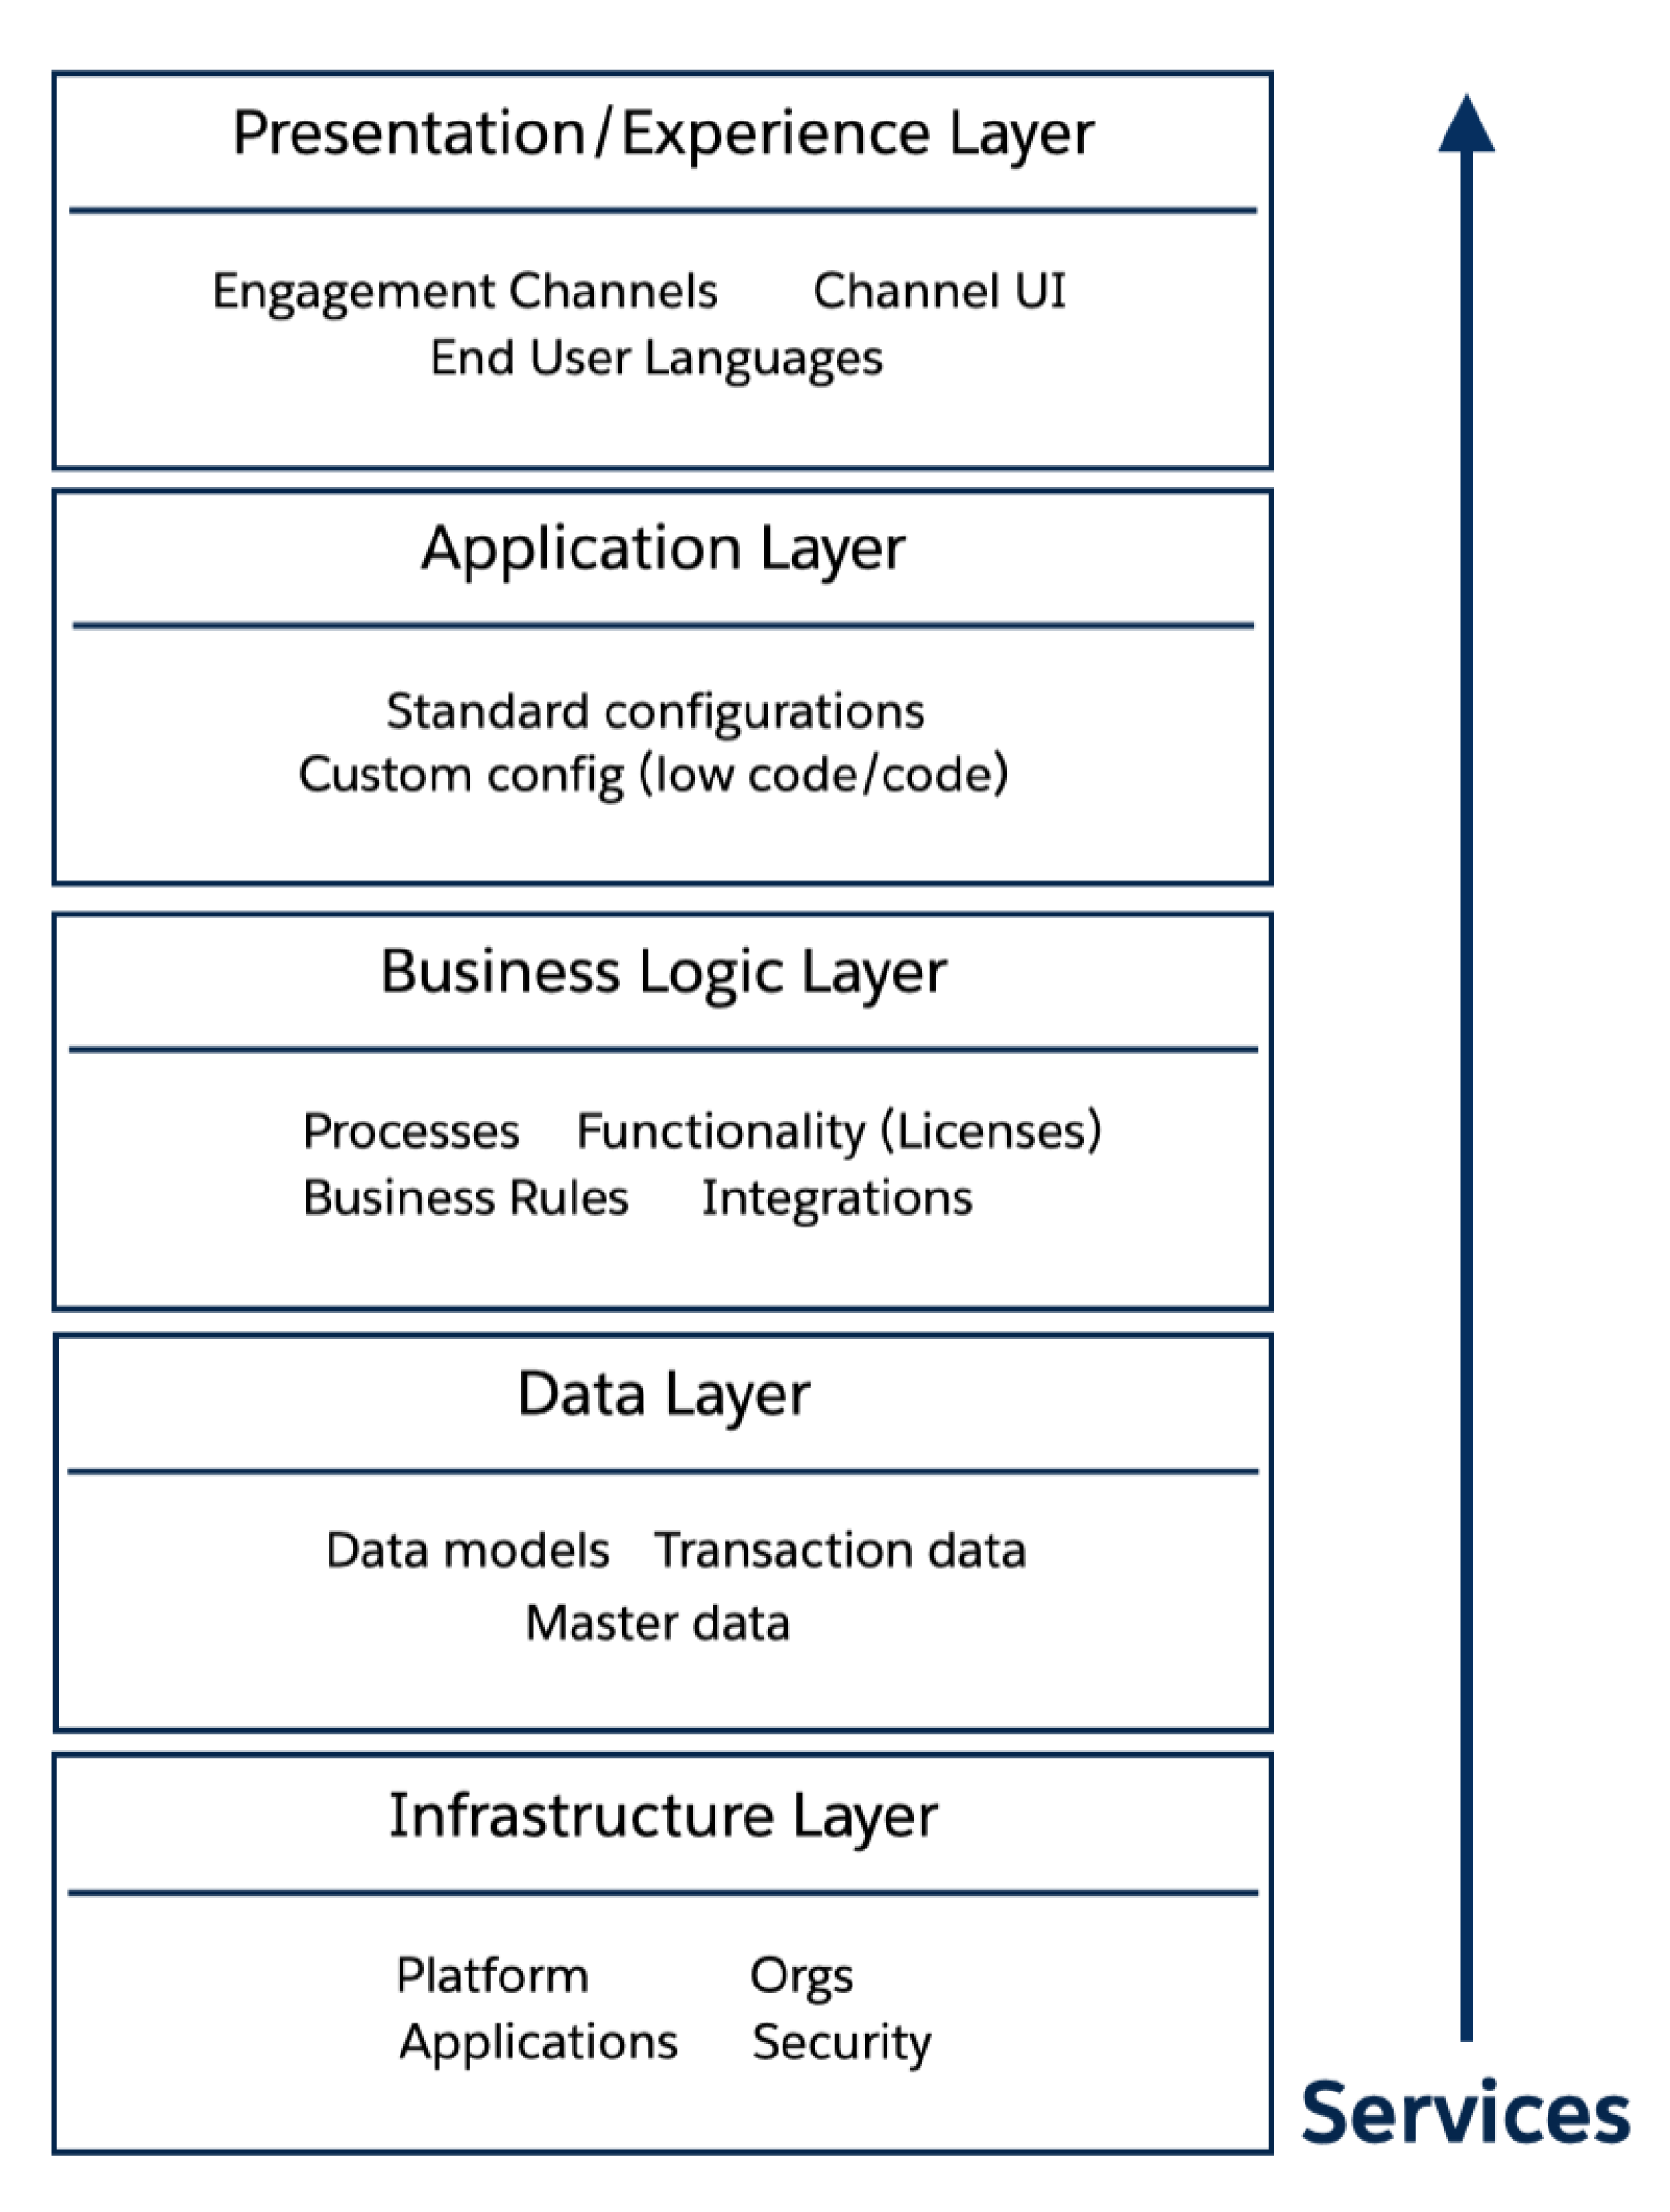 architecture layers with arrow showing service direction